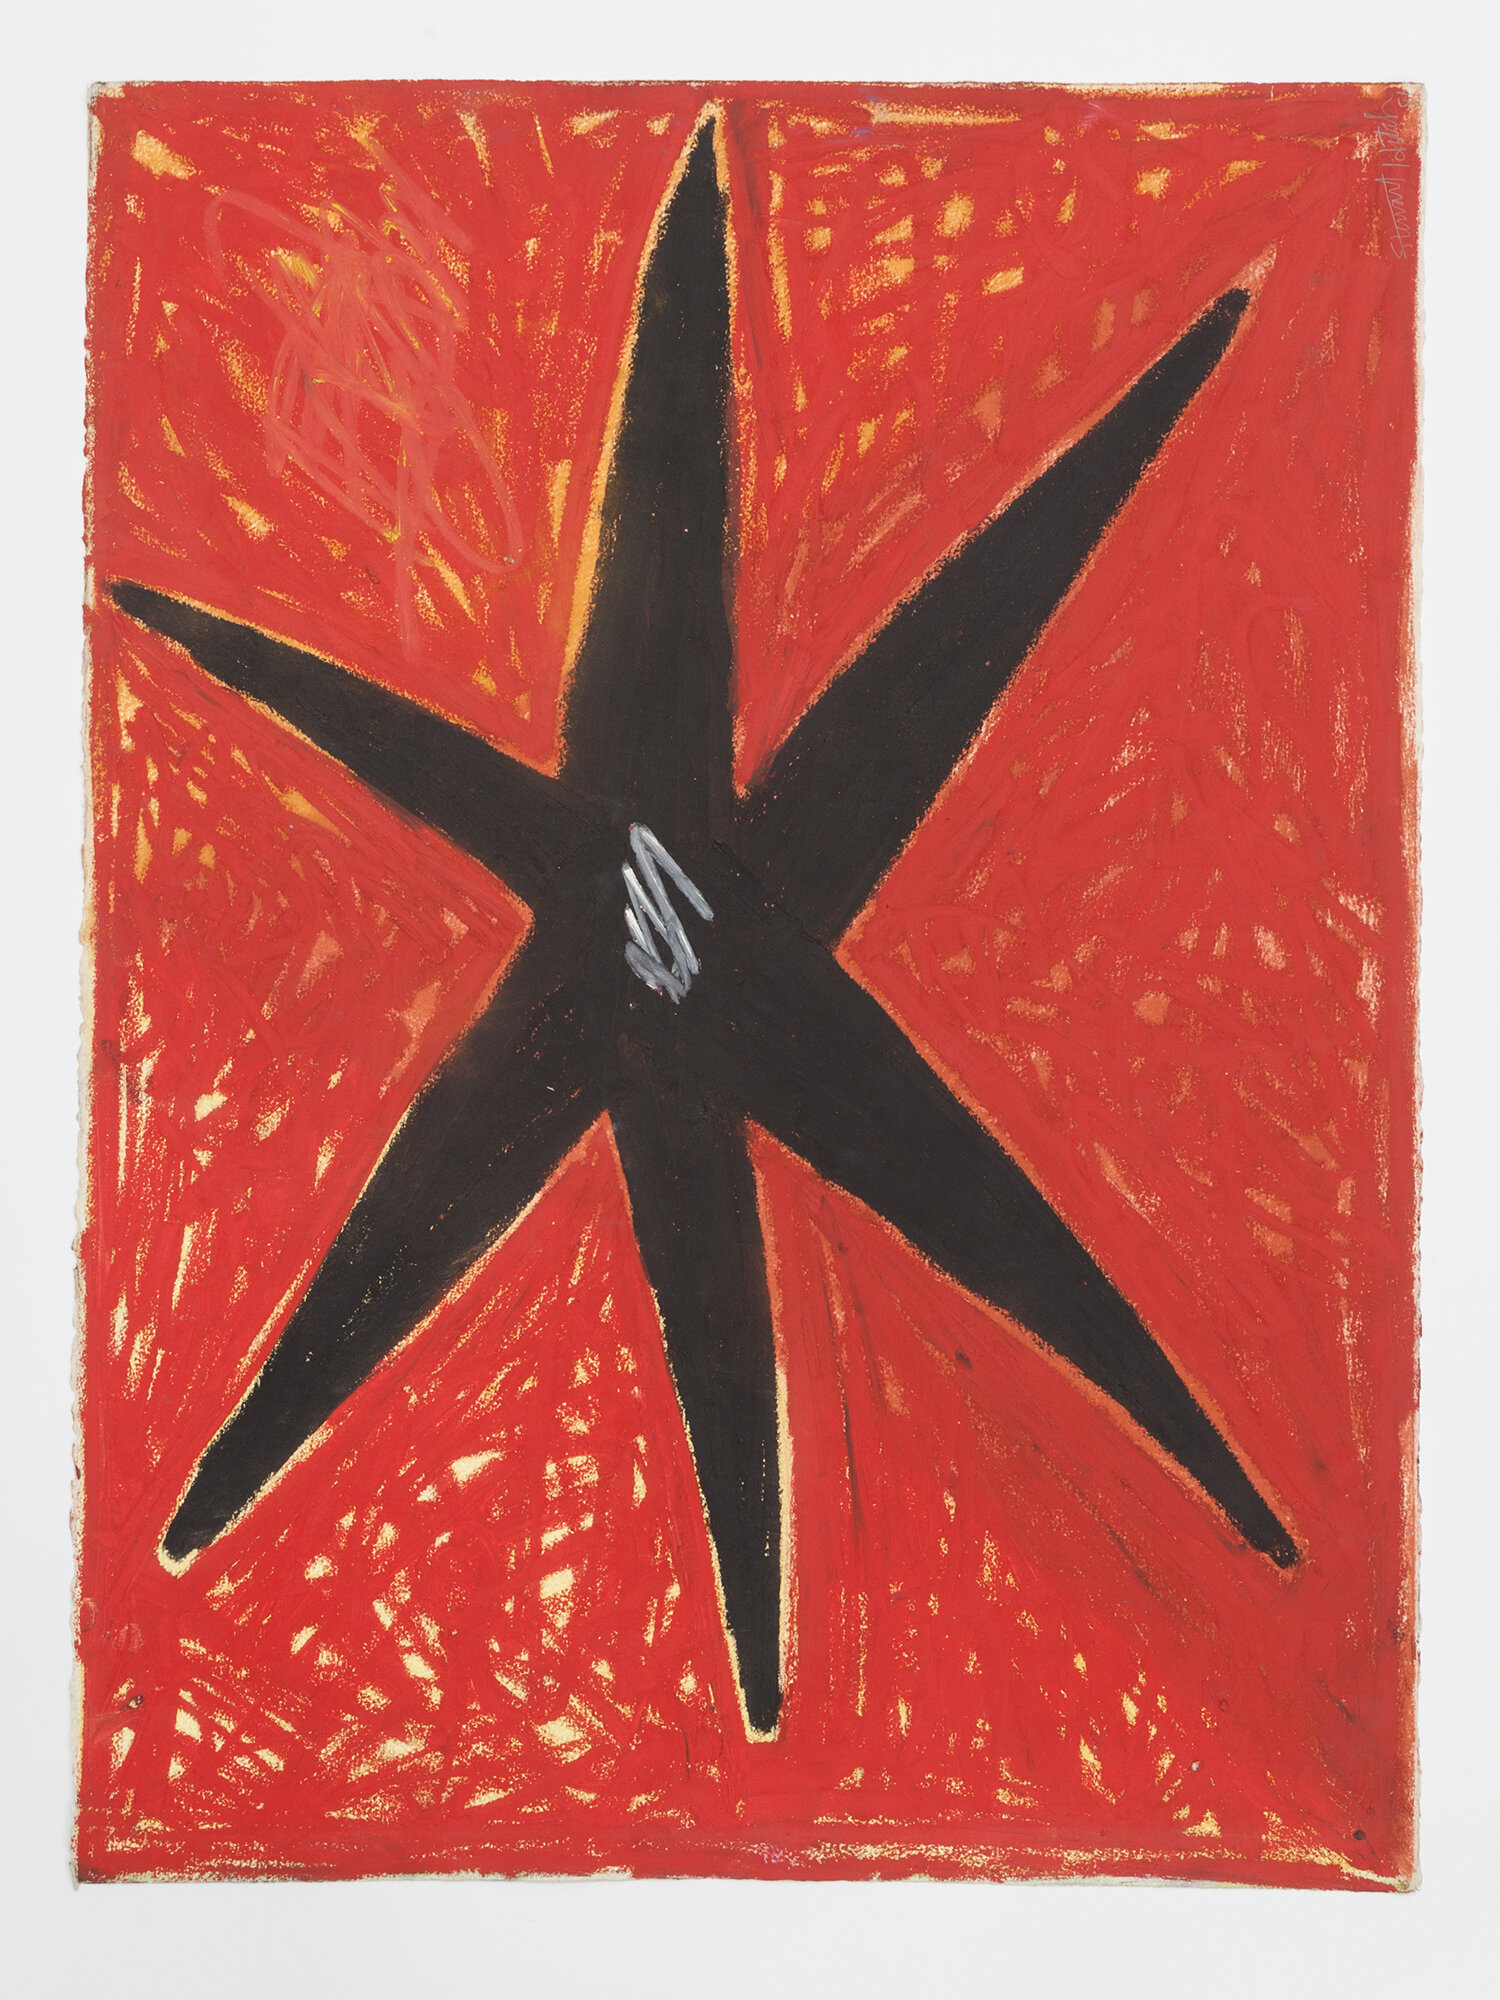  Stewart Hitch  Untitled , 1981, Oil stick on paper 30 x 22 inches 